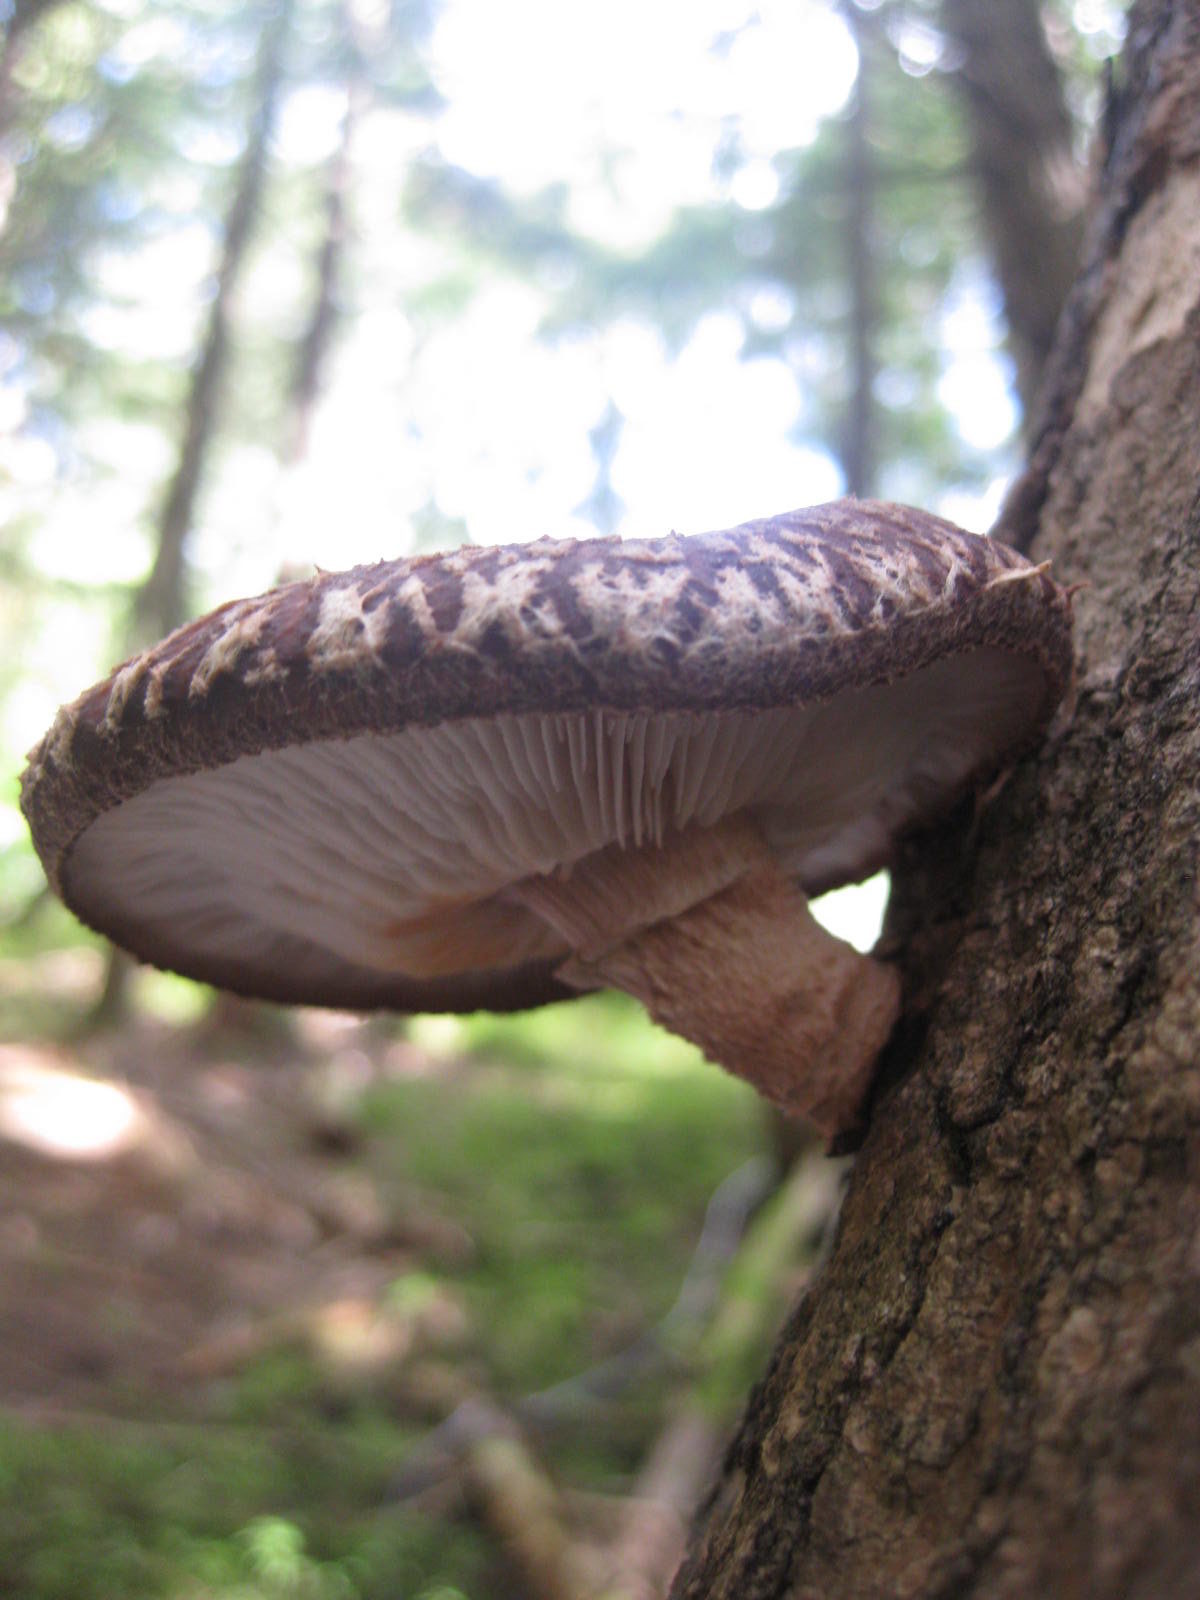 A shiitake mushroom with the edges still curled over the gills slightly. It is growing out of the side of a log.